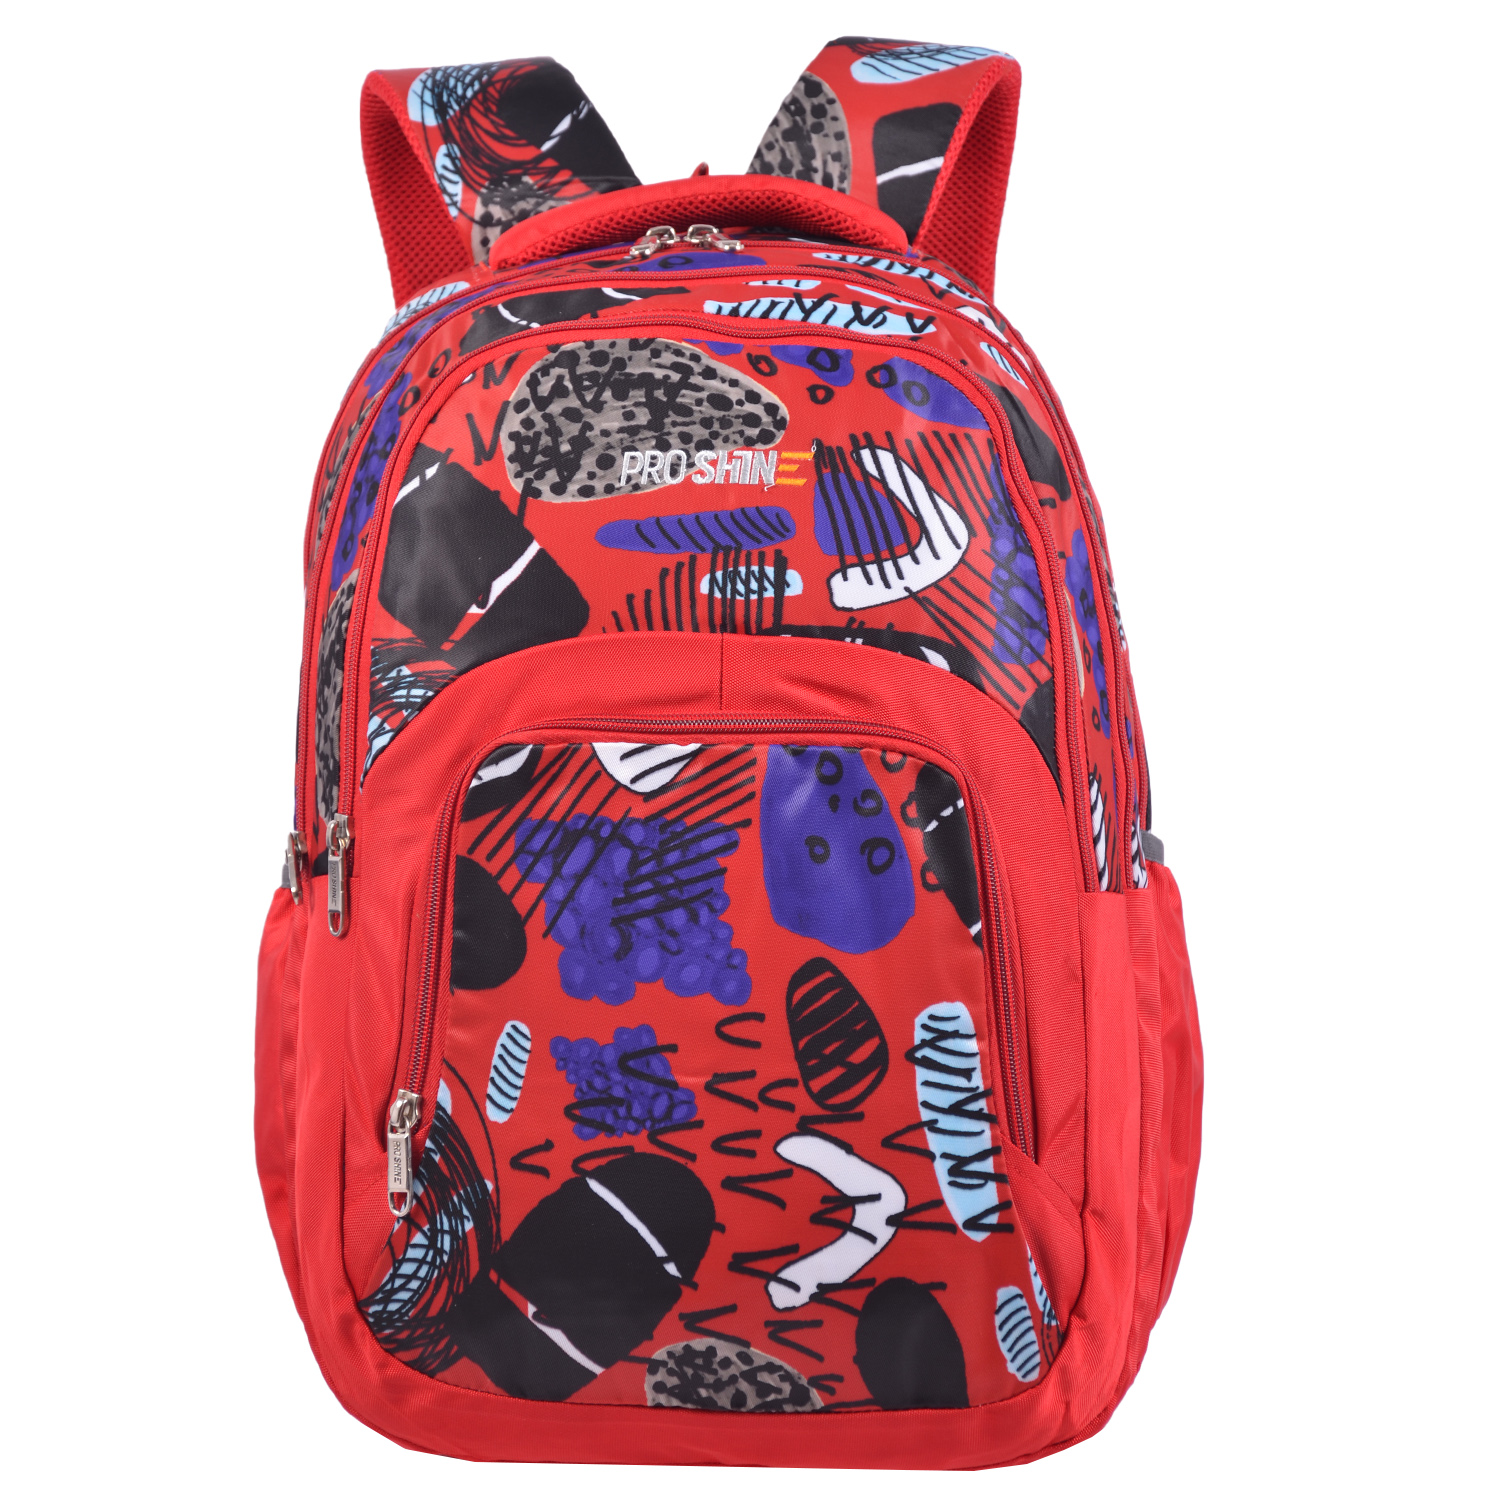 RoshanBags_PROSHINE 38L CASUAL BACKPACK A0398 RED